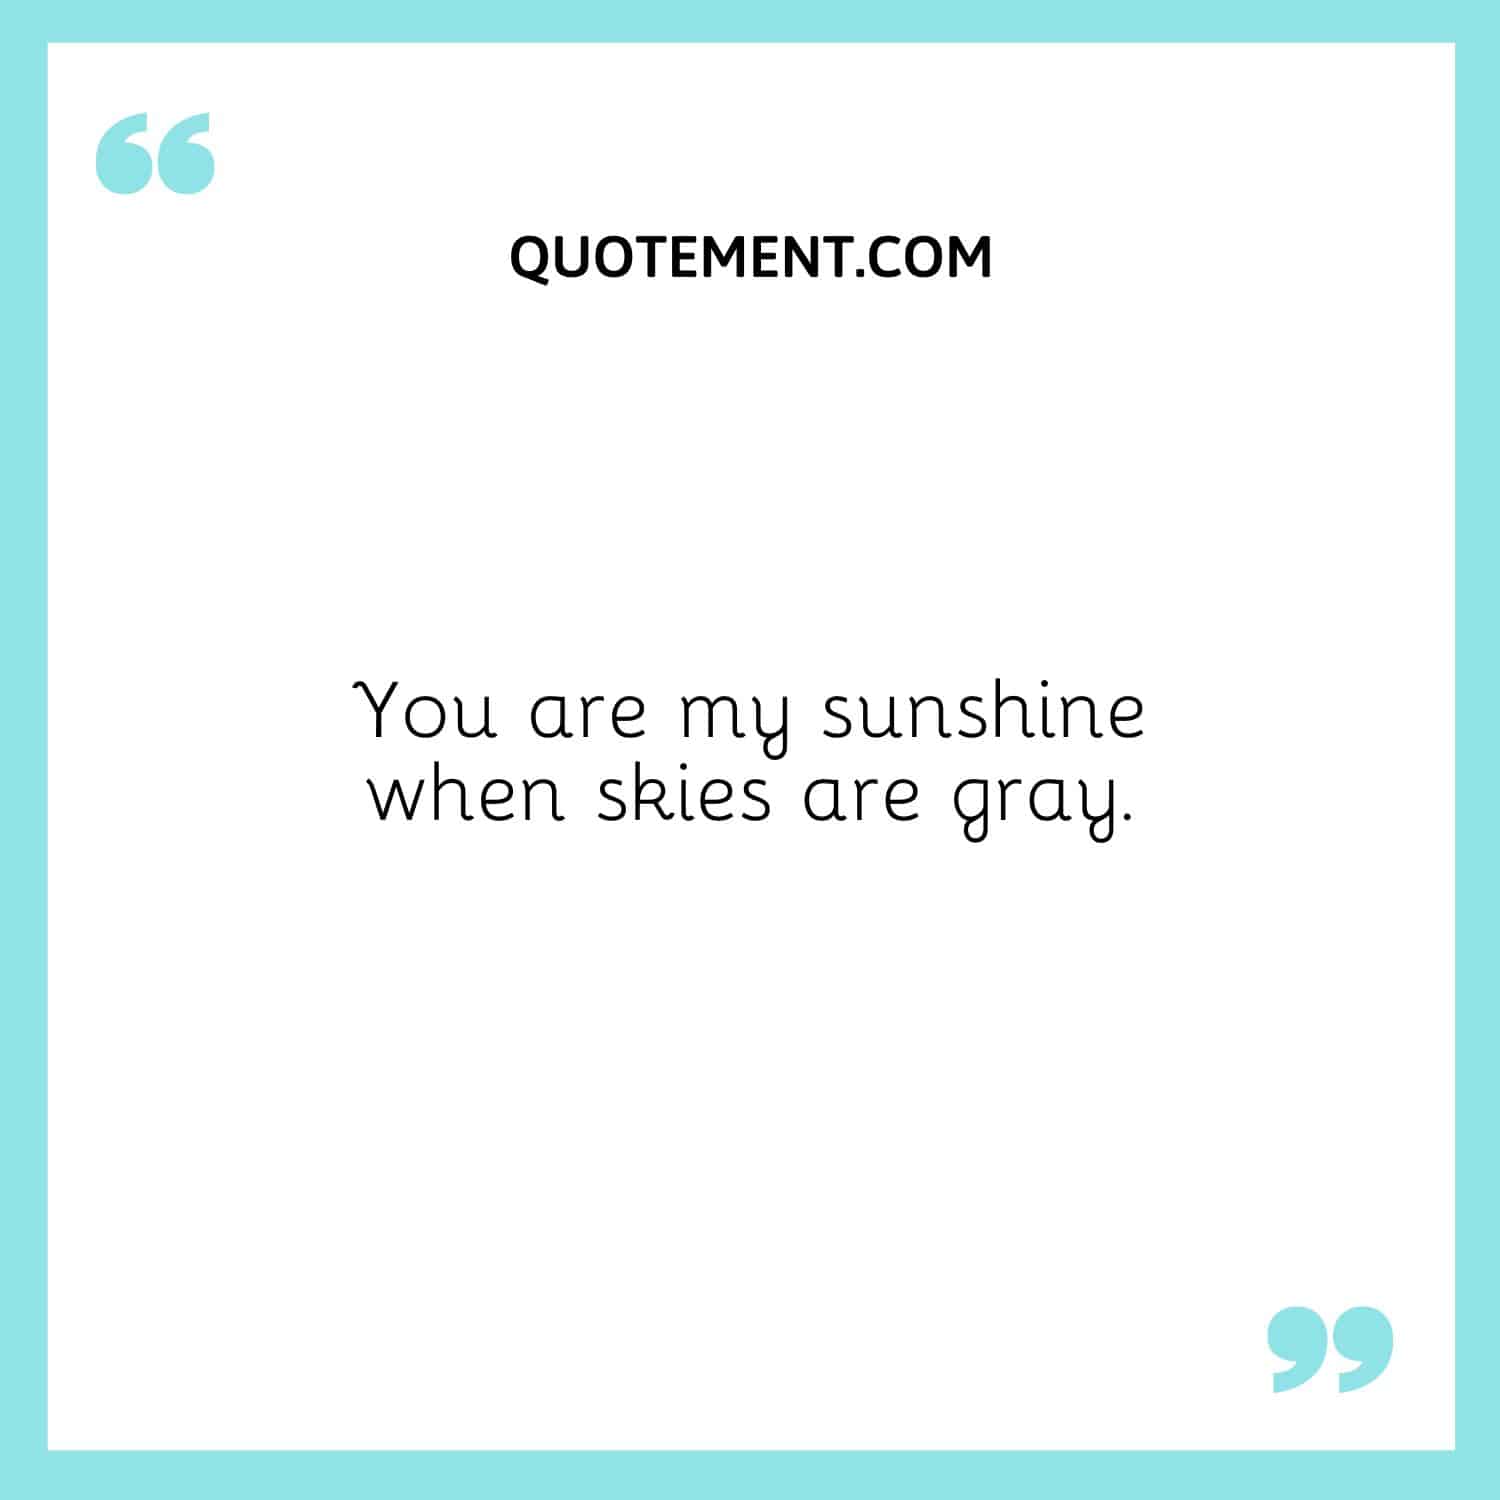 You are my sunshine when skies are gray.